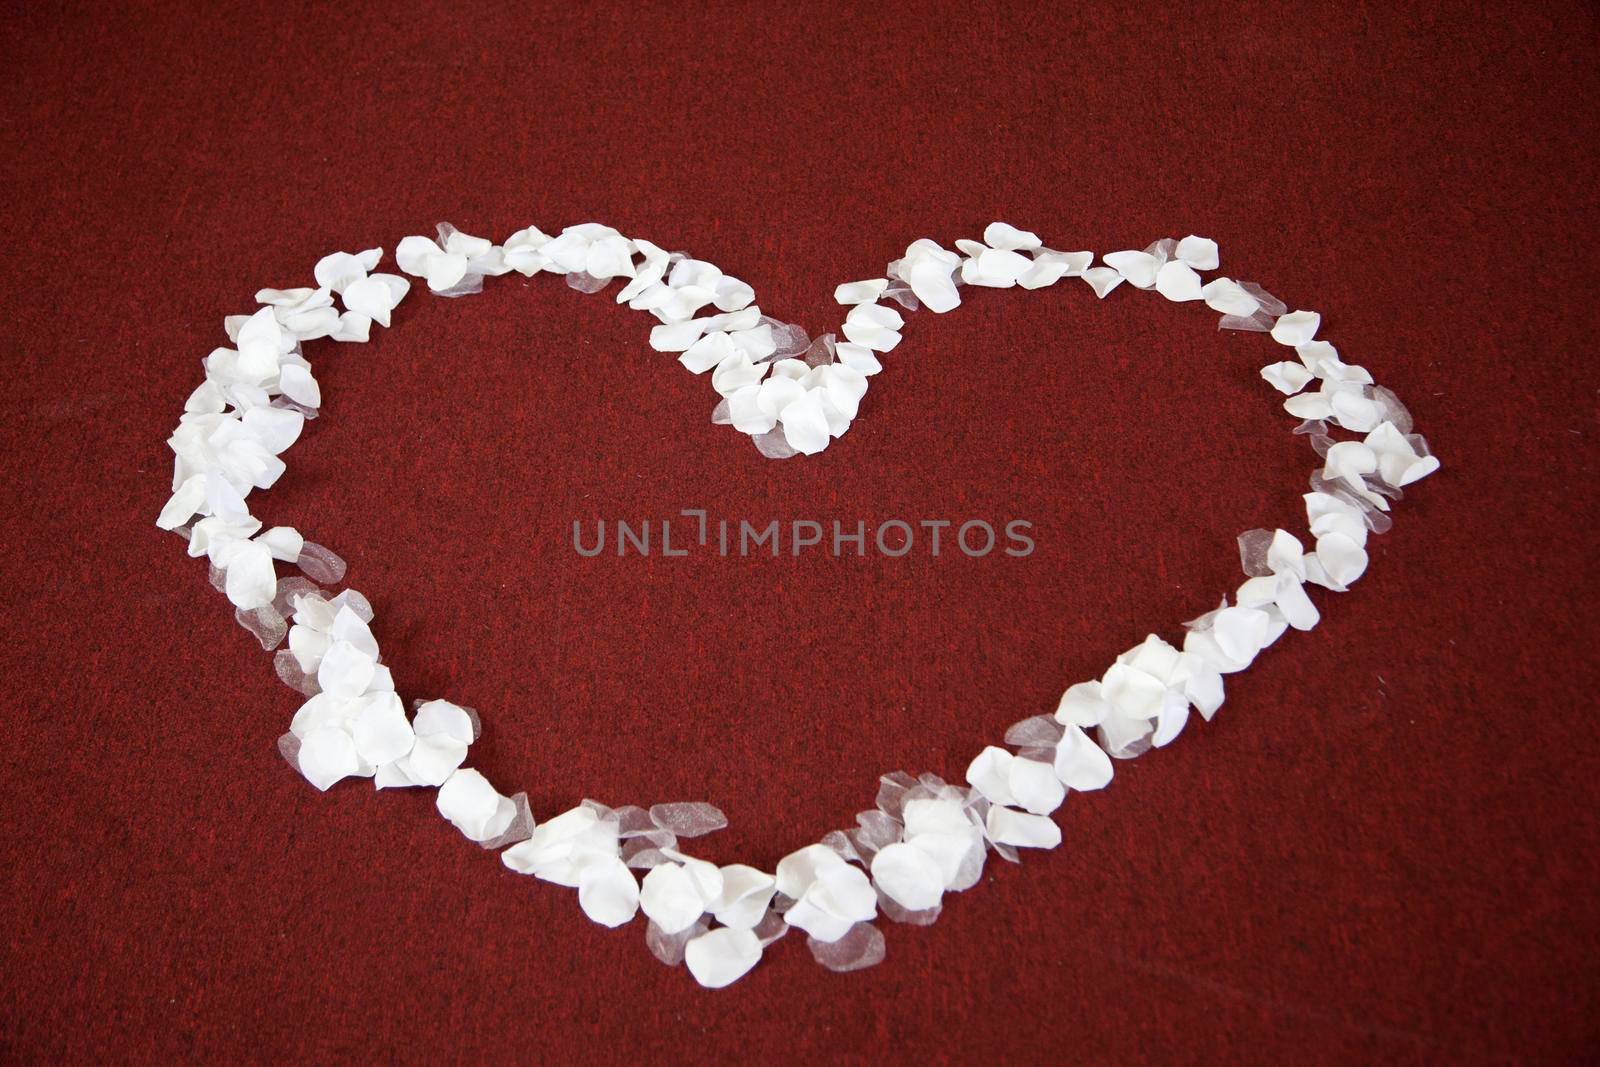 On a red carpet, white flower petals make the shape of a heart